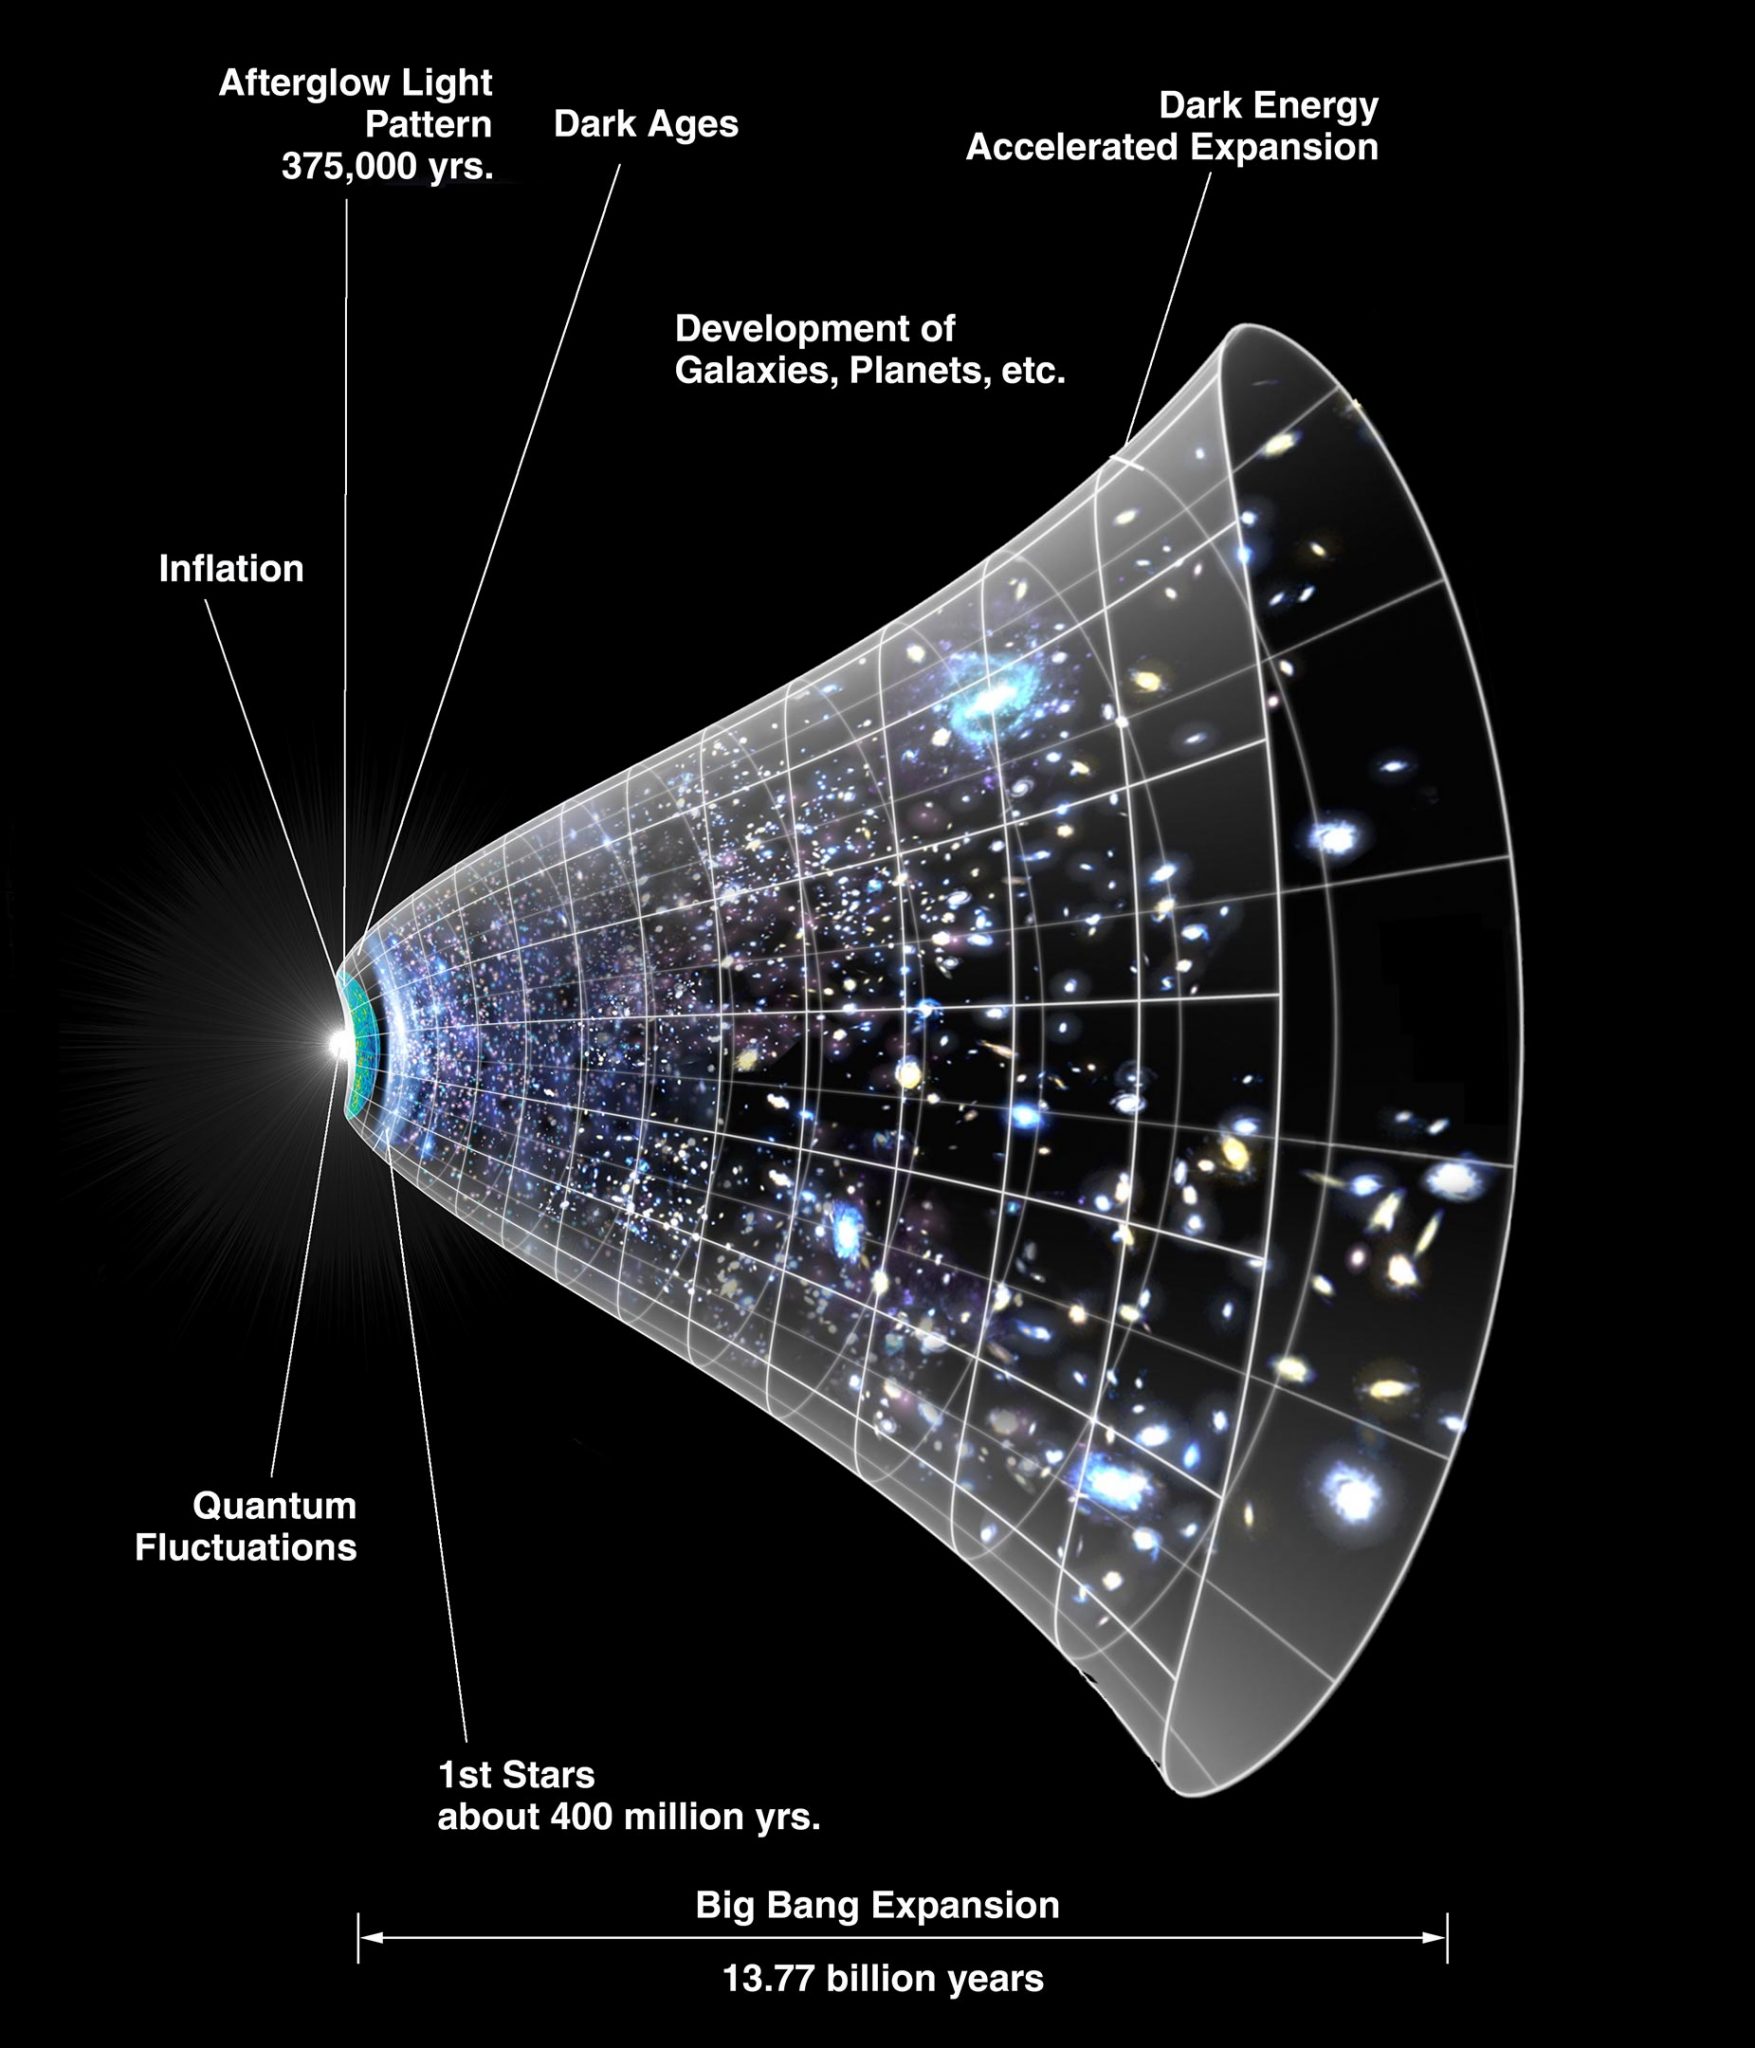 How Is The Universe Accelerating If The Expansion Rate Is Dropping?